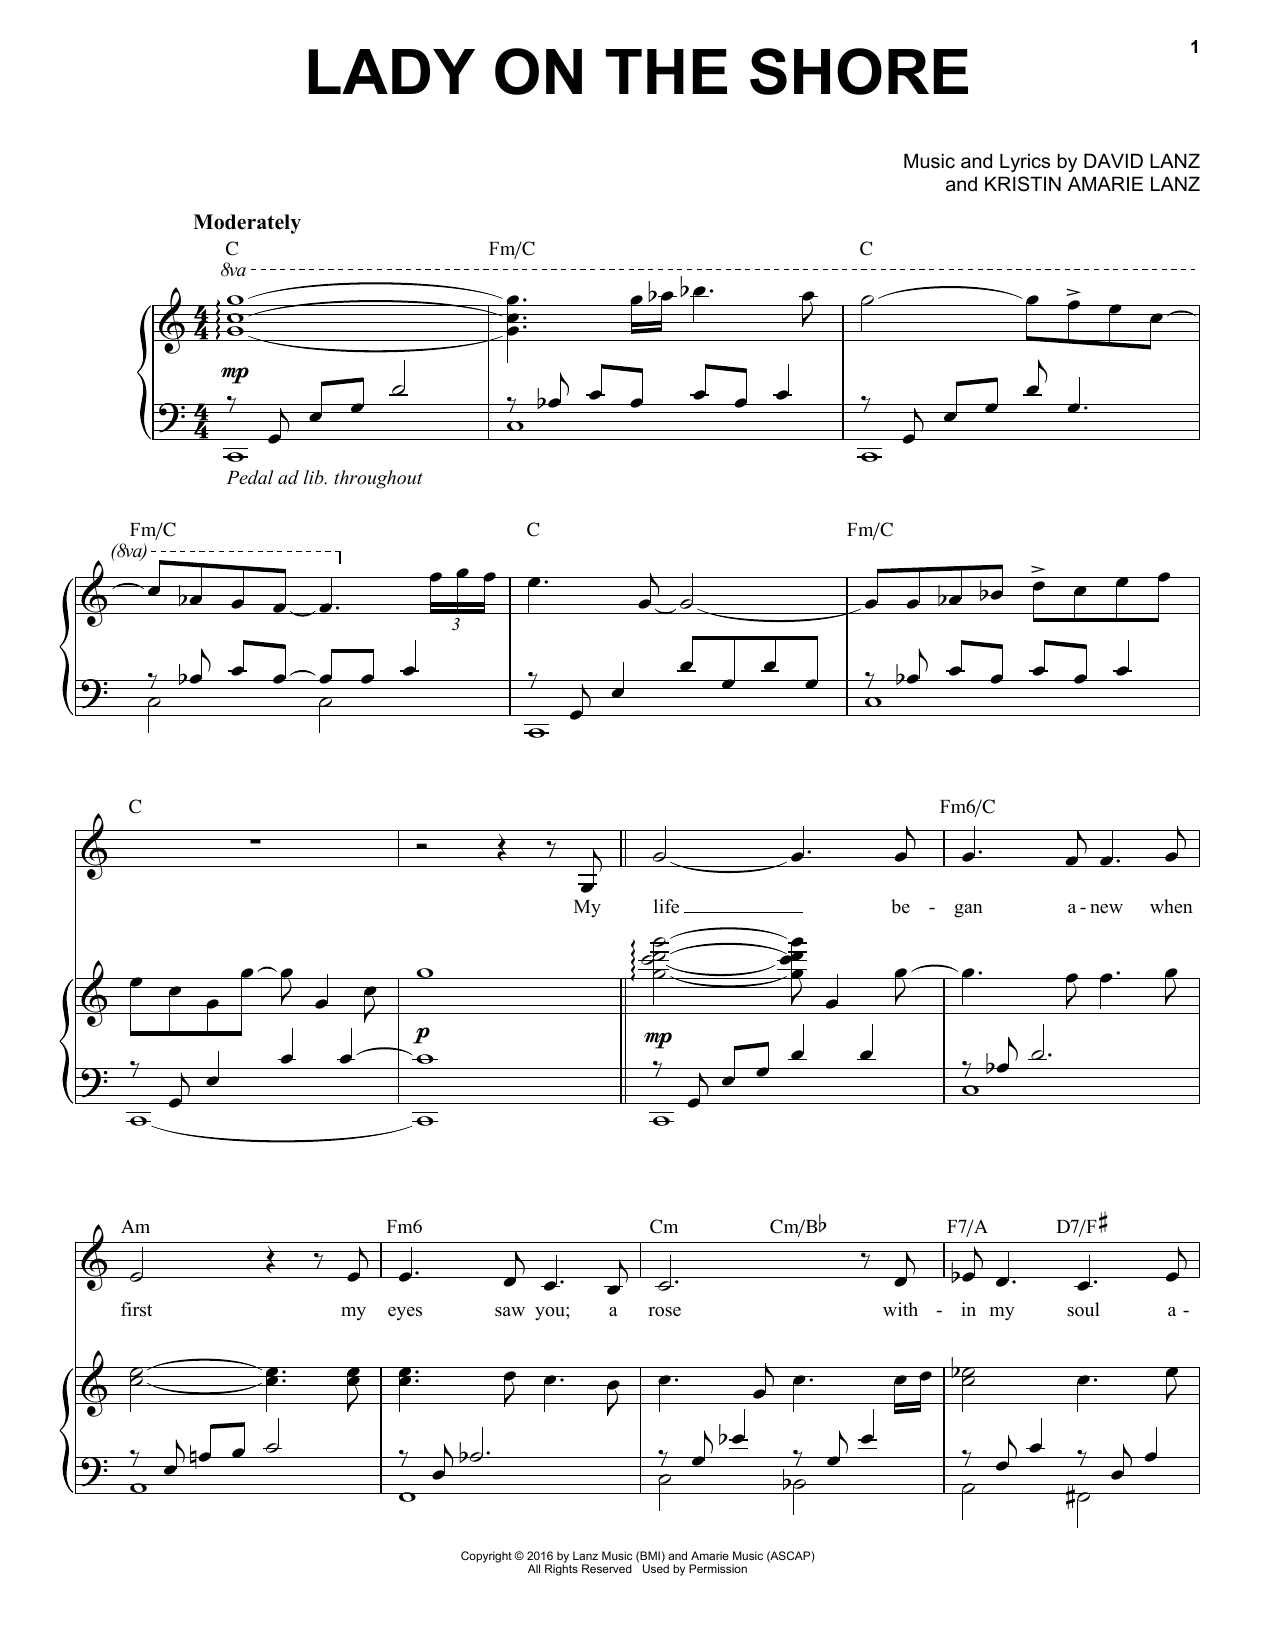 David Lanz & Kristin Amarie Lady on the Shore sheet music notes and chords. Download Printable PDF.